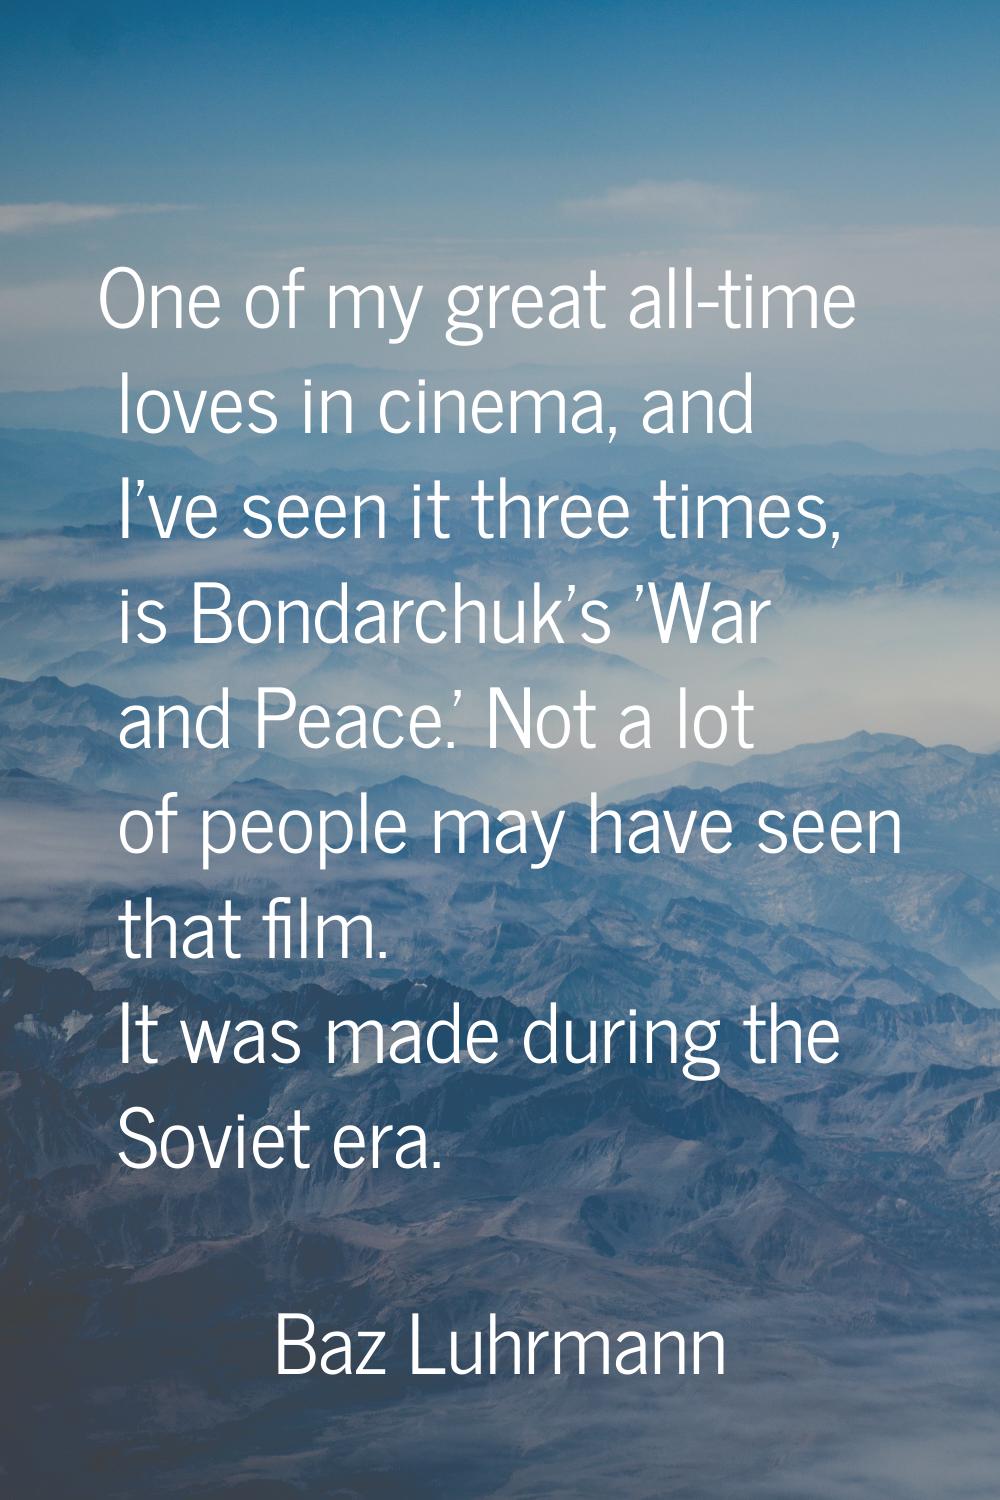 One of my great all-time loves in cinema, and I've seen it three times, is Bondarchuk's 'War and Pe